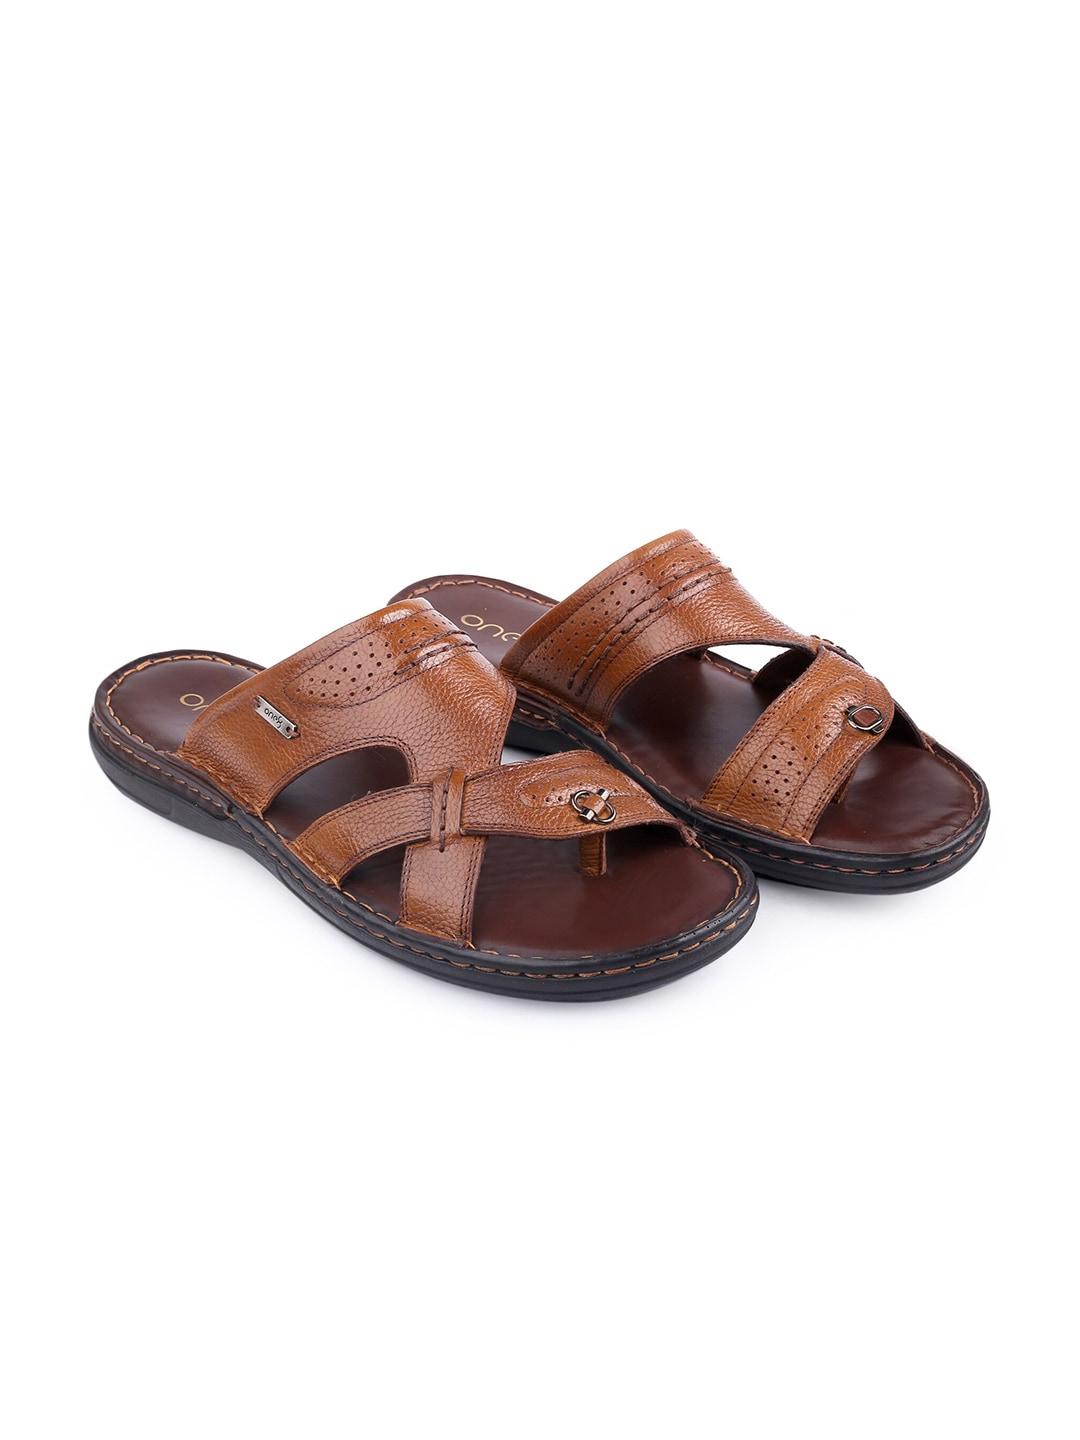 one8 men tan & coffee brown leather comfort sandals